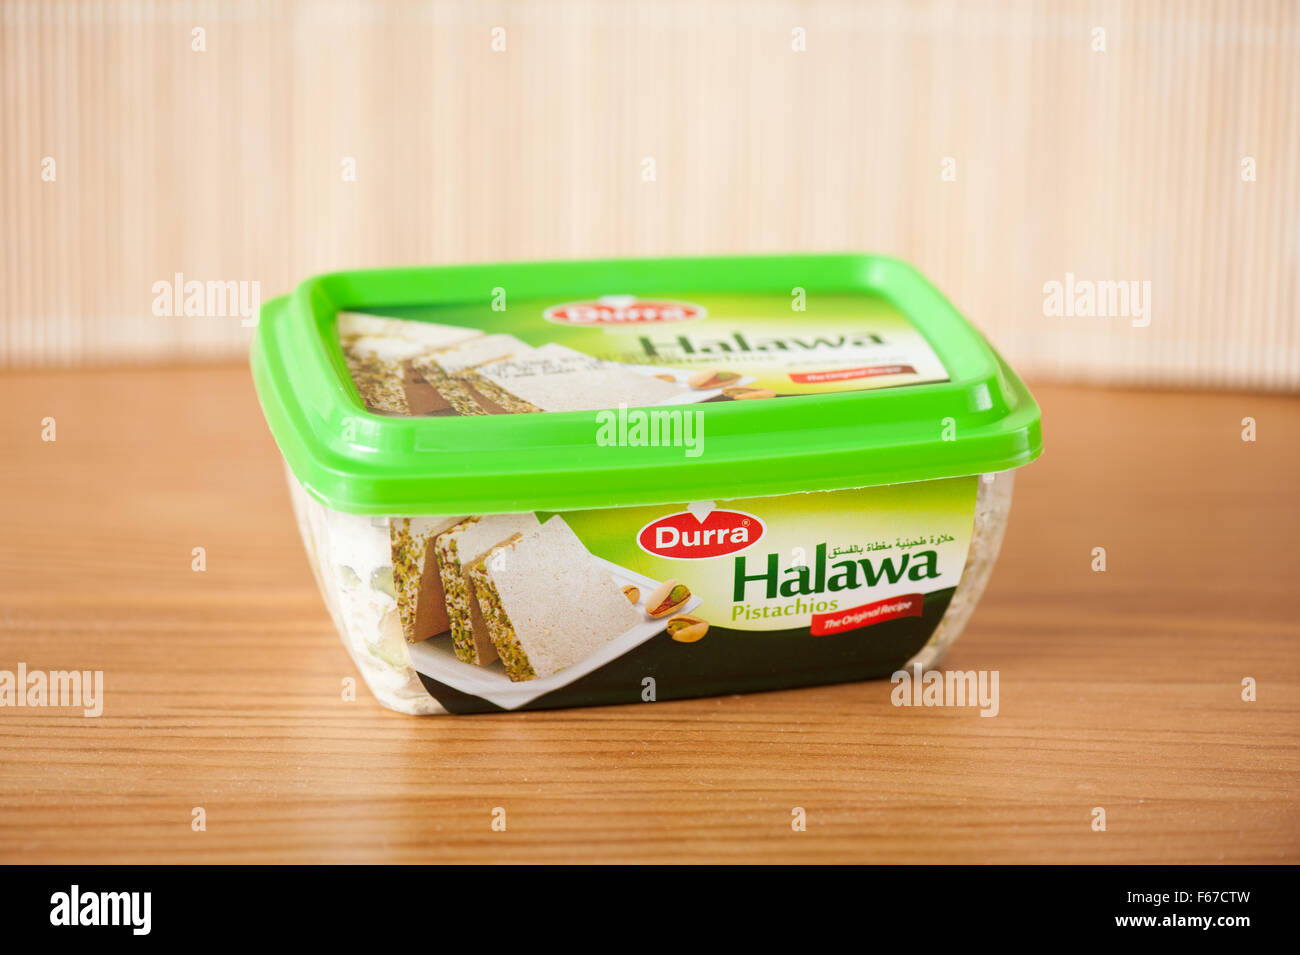 Durra Halawa pistachios dessert, sweet food product 350g in plastic green pack, Arabian product, one package in horizontal... Stock Photo